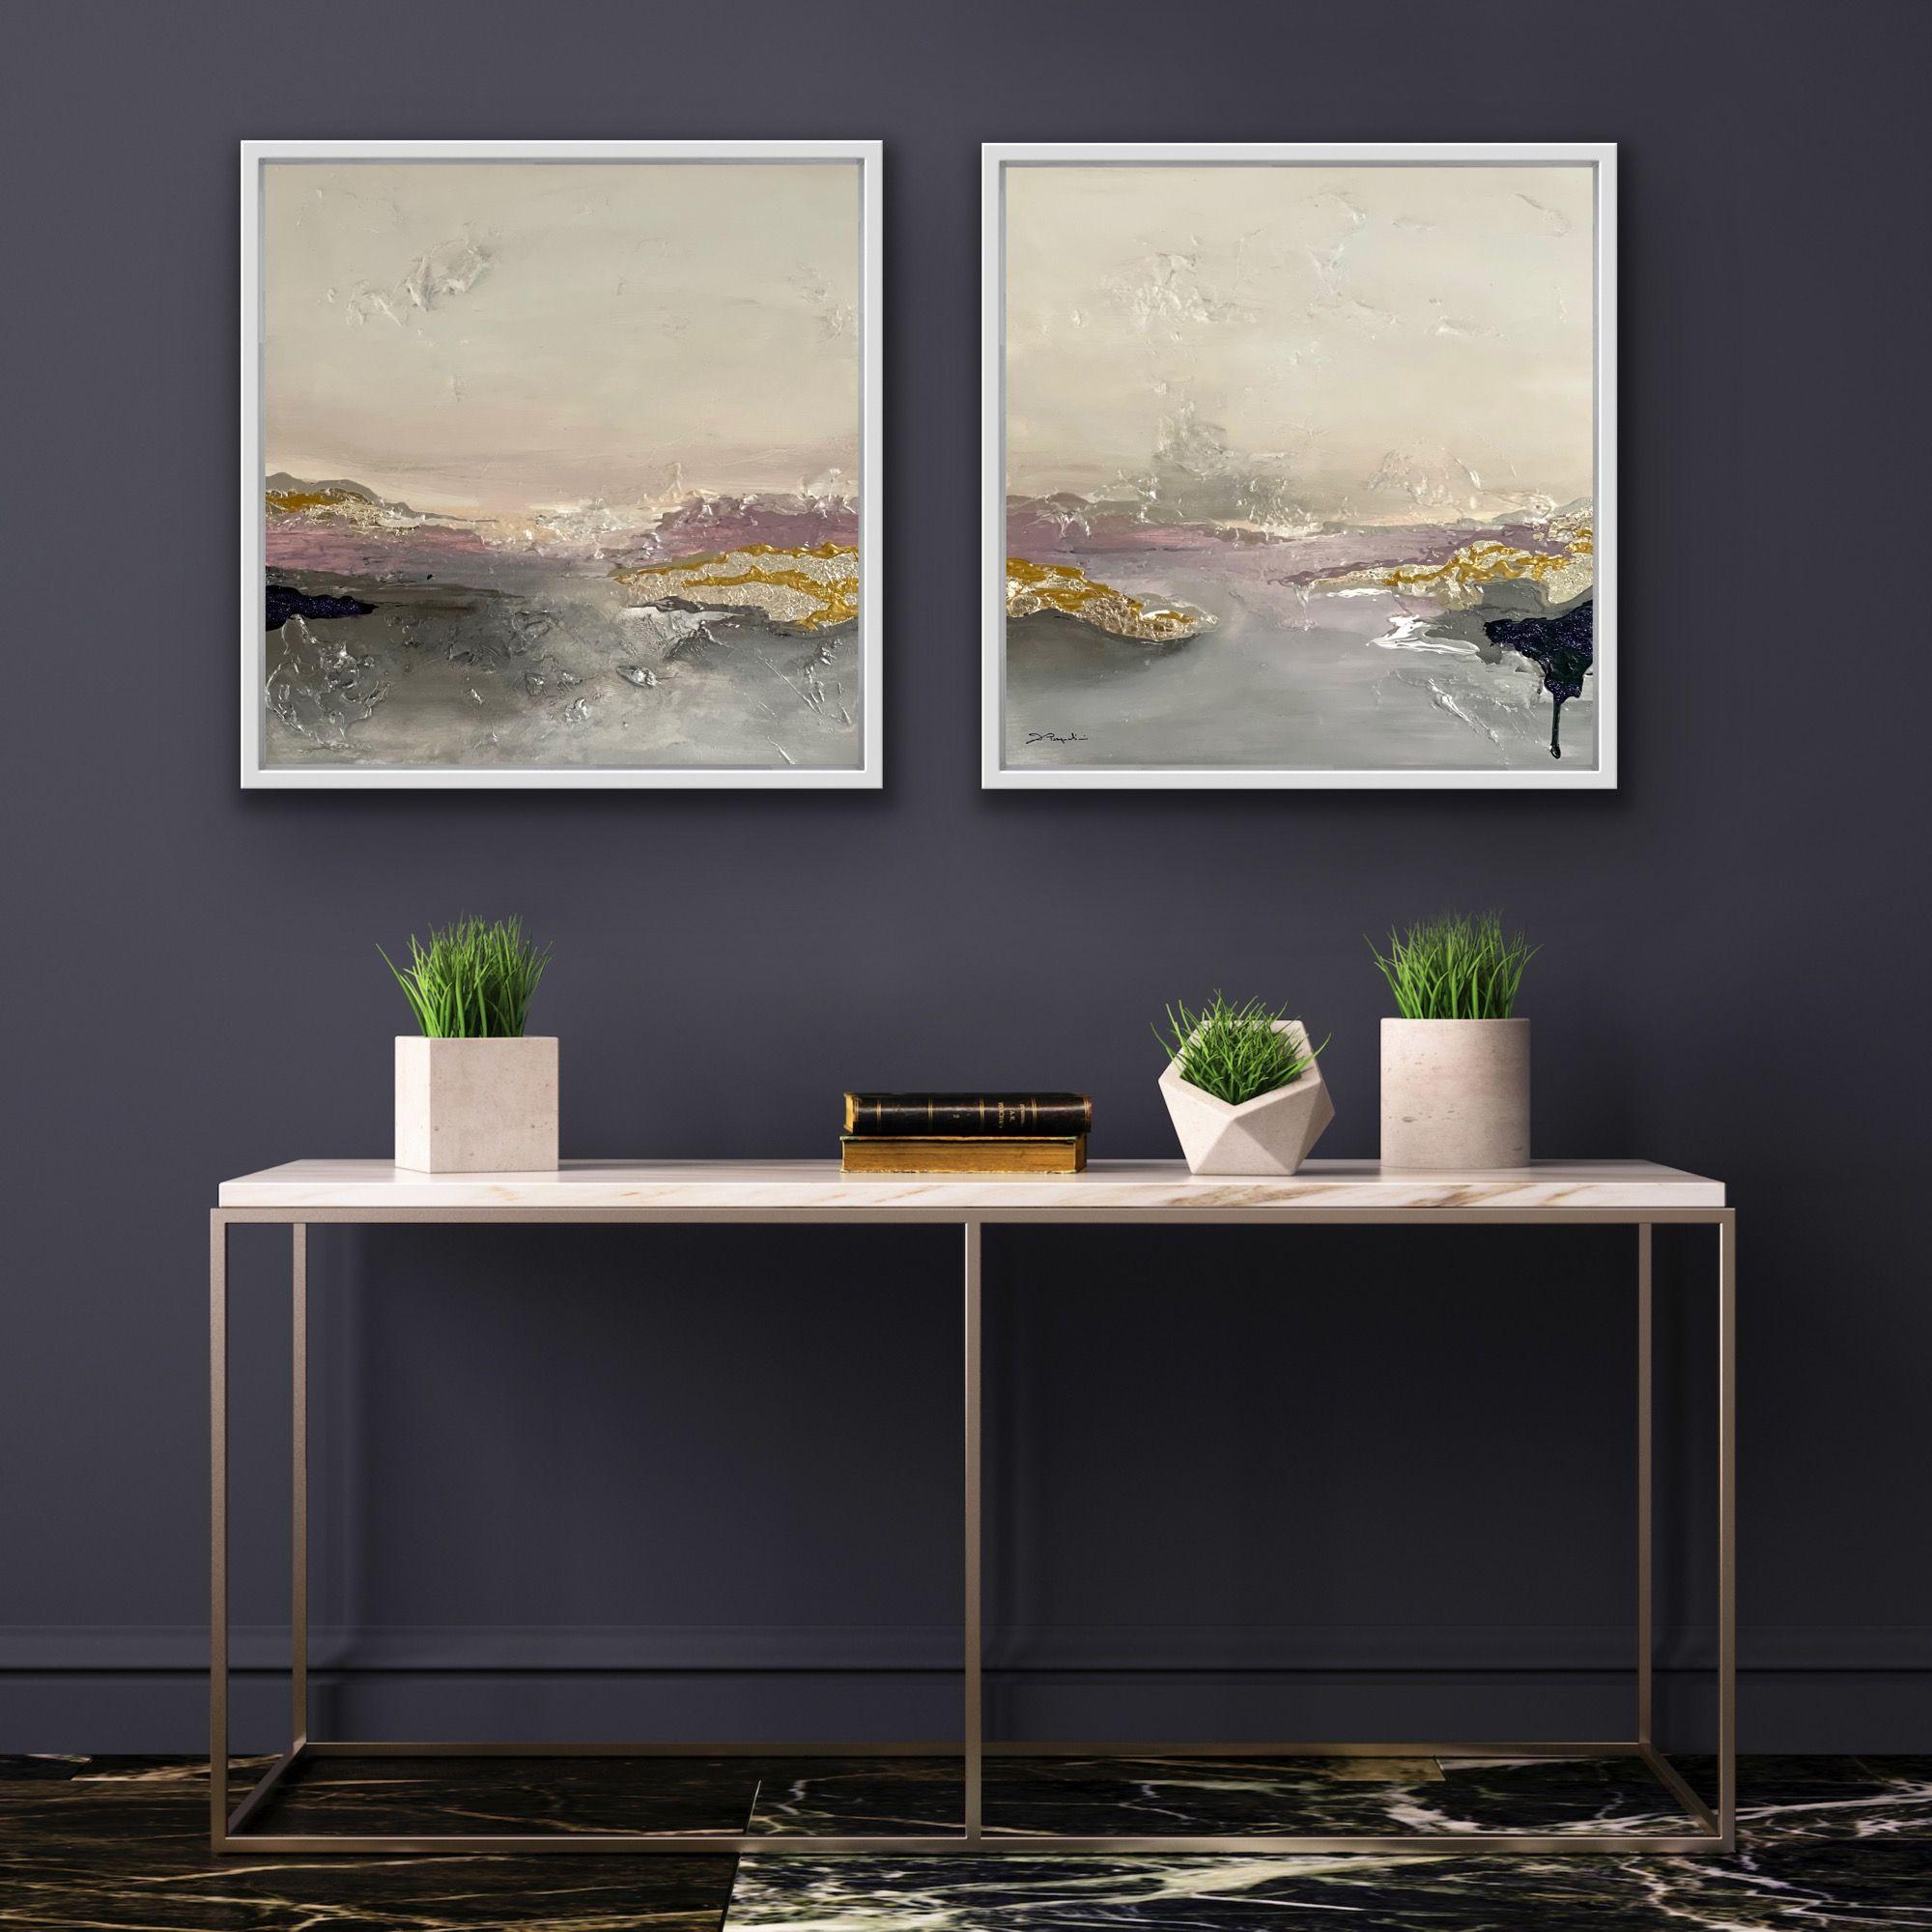 This serie is about sensitivity to our surroundings.... ethereal introspective landscape opposed to realistic one . My goal is to let the viewer completes the painting with what is personally meaningful creating space for his memories and his